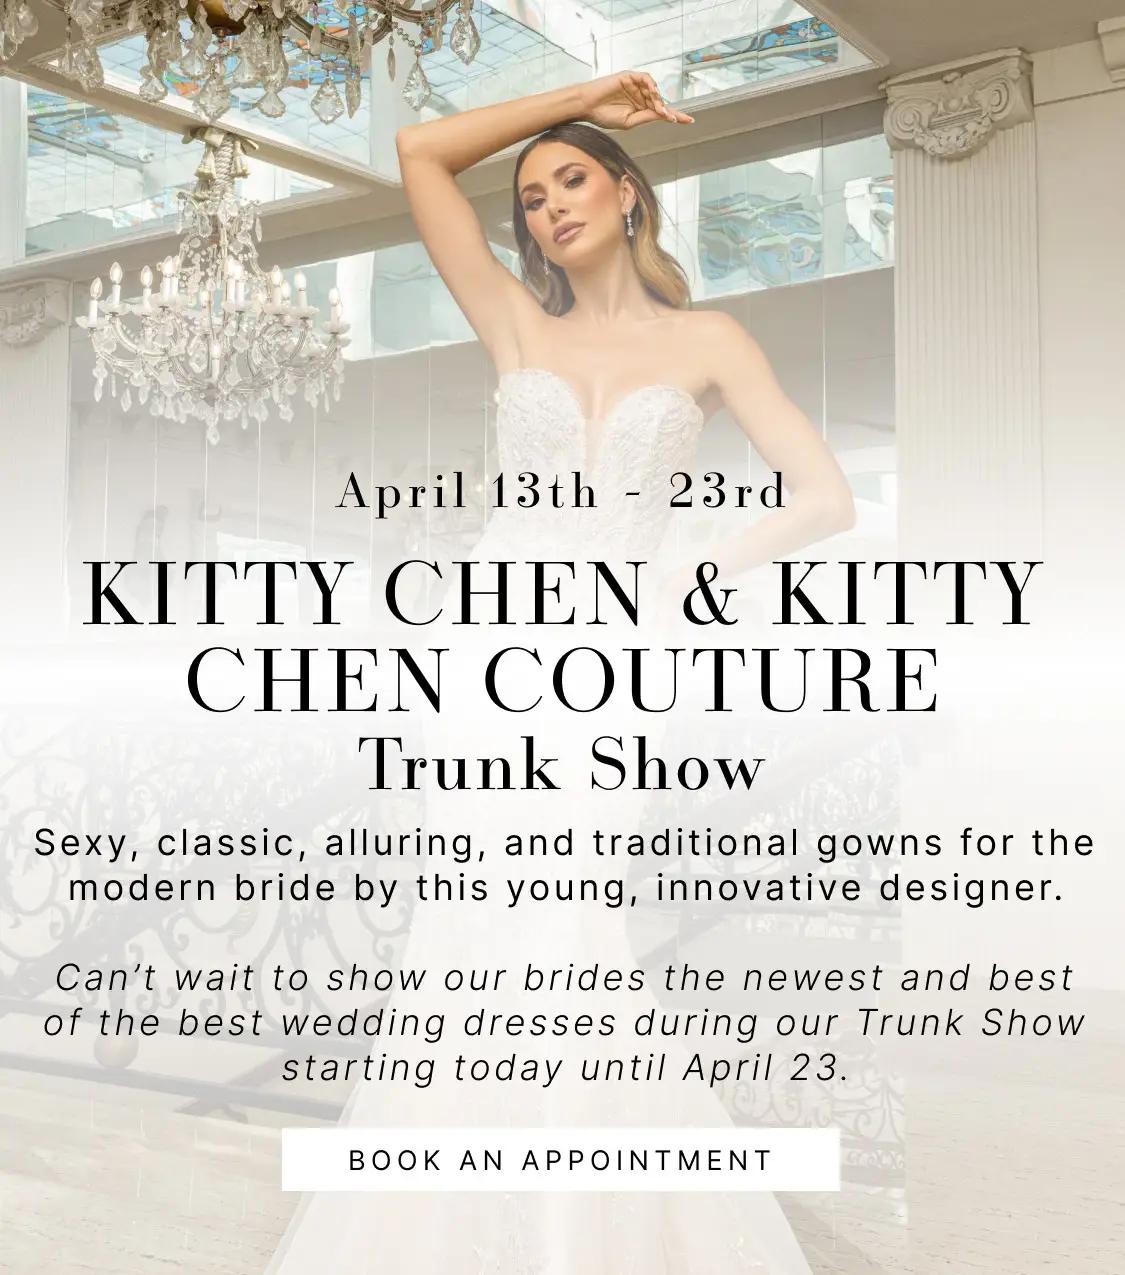 "Kitty Chen & Kitty Chen Couture Trunk Show" banner for mobile